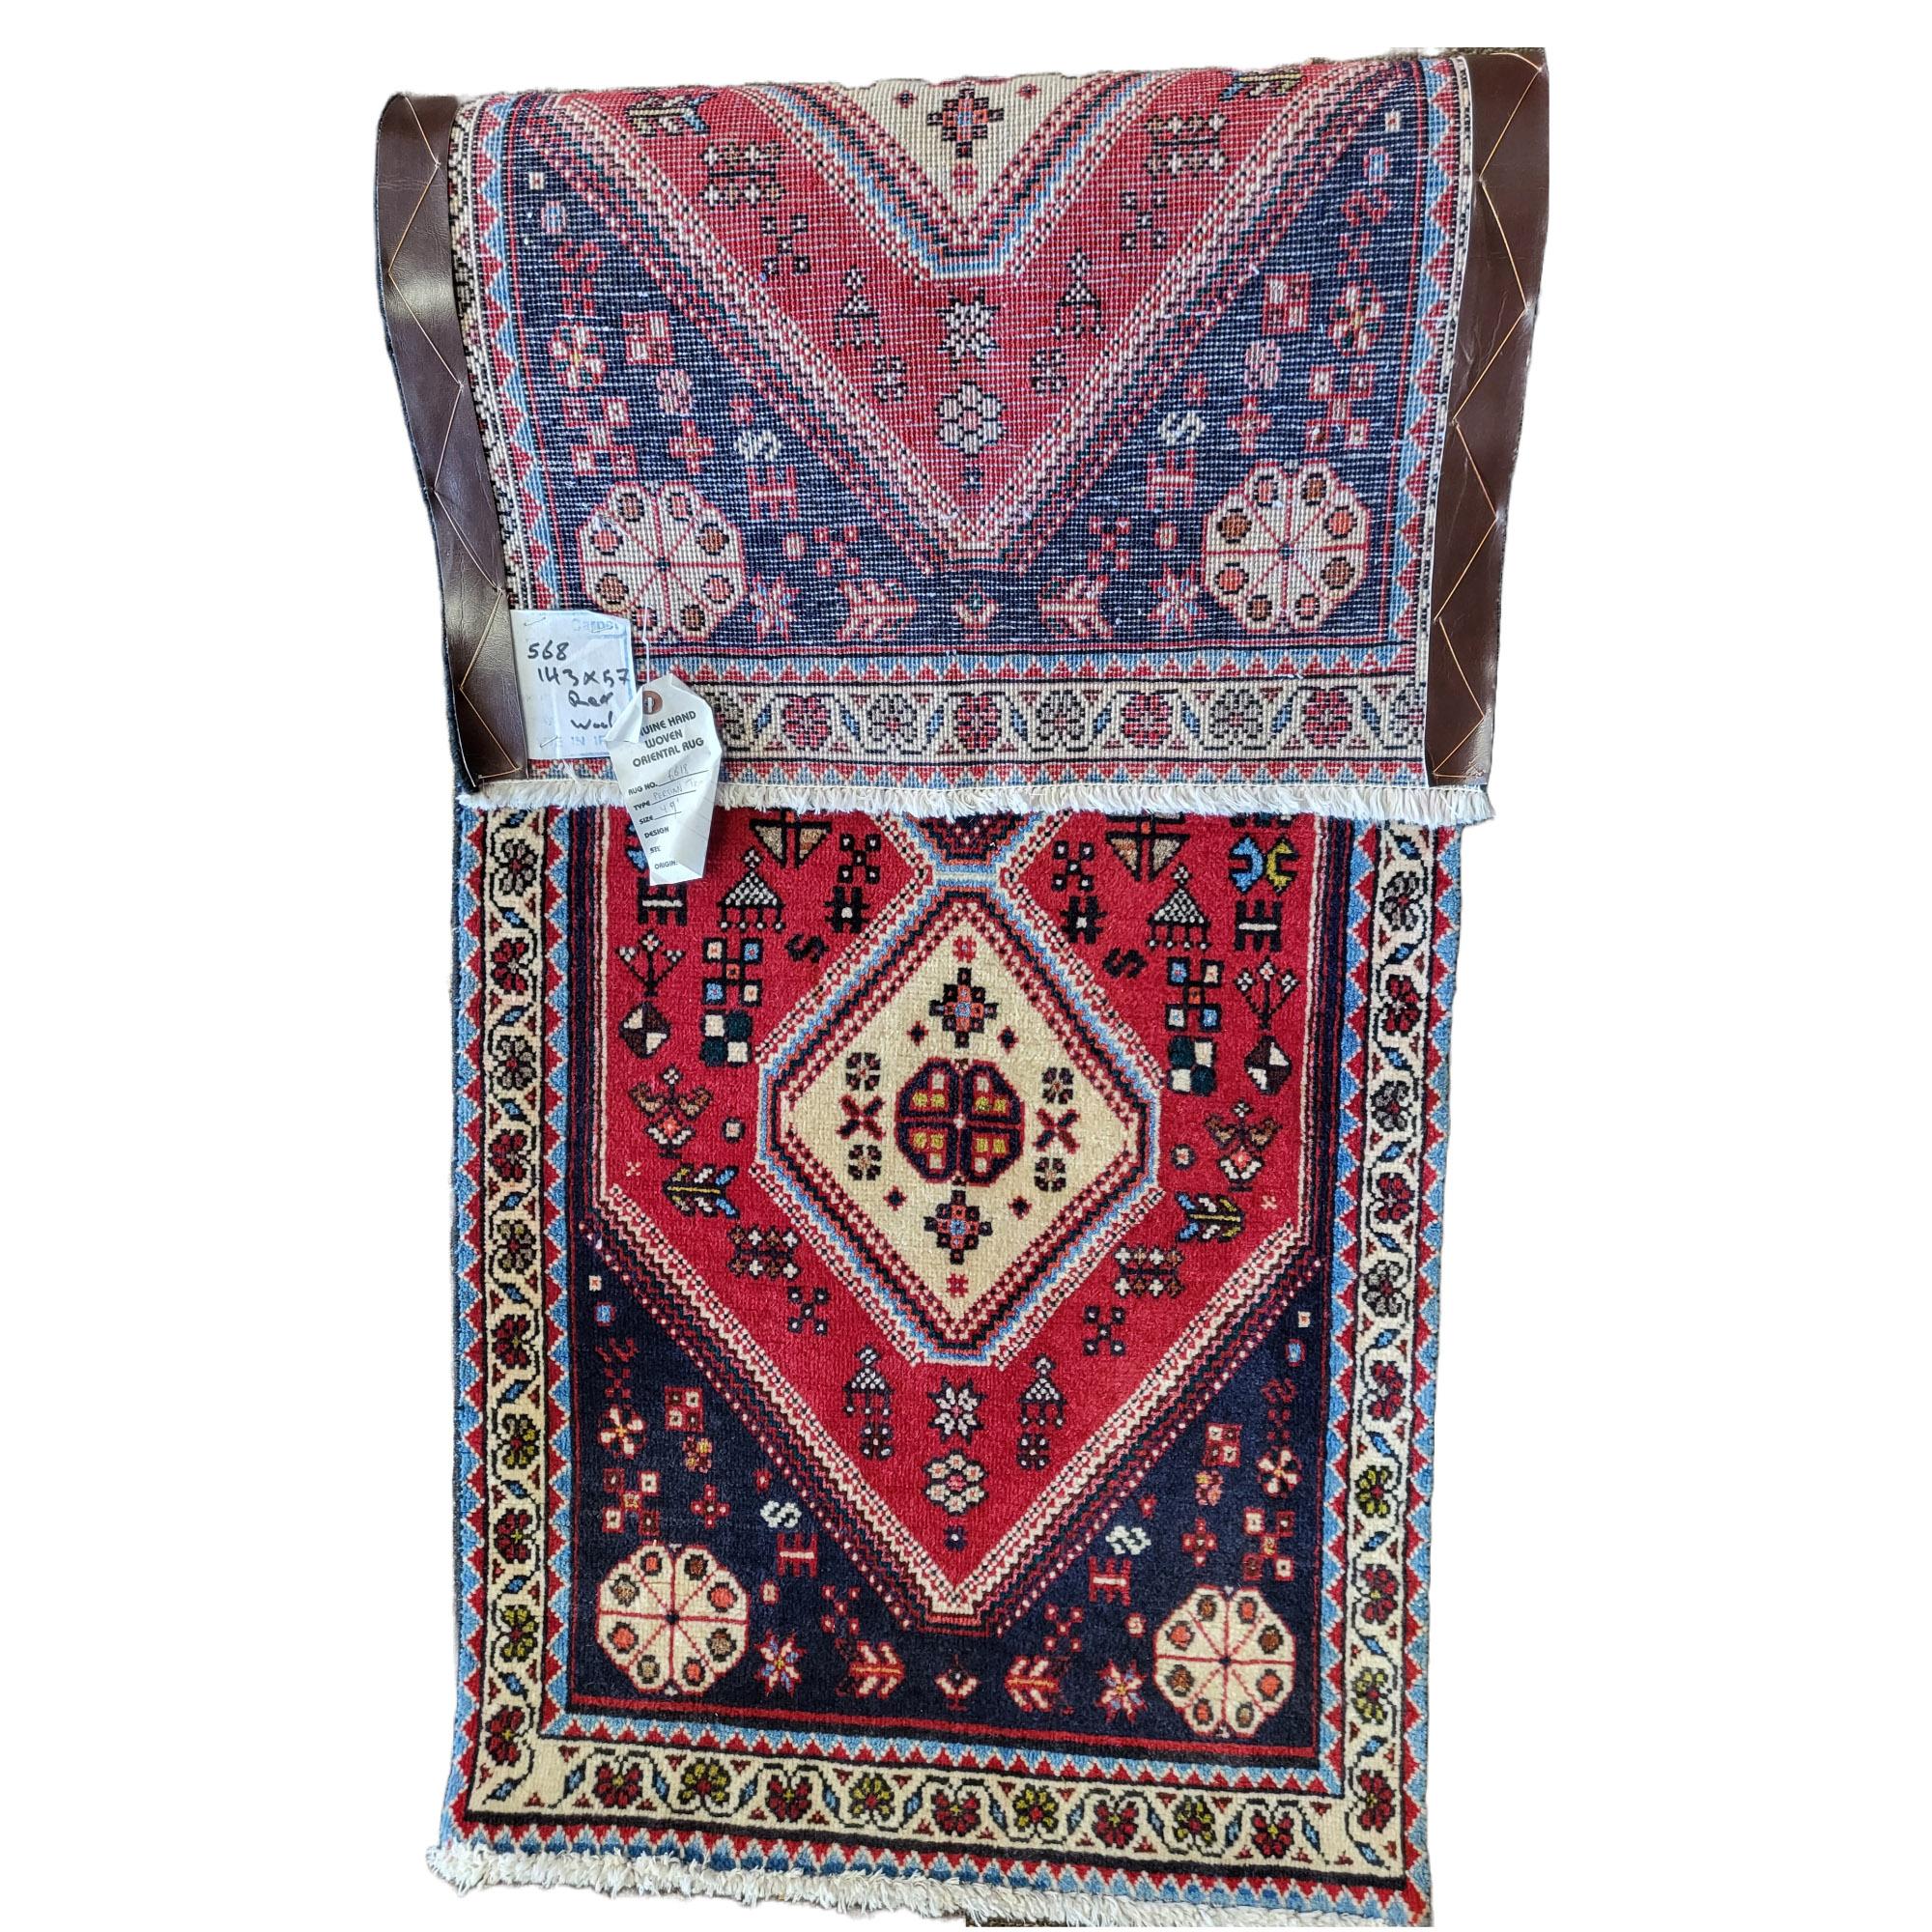 Beautiful 60's Persian Abadeh Runner

1ft 9 in x 4ft

Vibrant, tightly woven and filled with joyful motifs, Abadeh rugs are timeless pieces of Persian heritage.

These ancient people have been weaving rugs for thousands of years. The craftsmanship